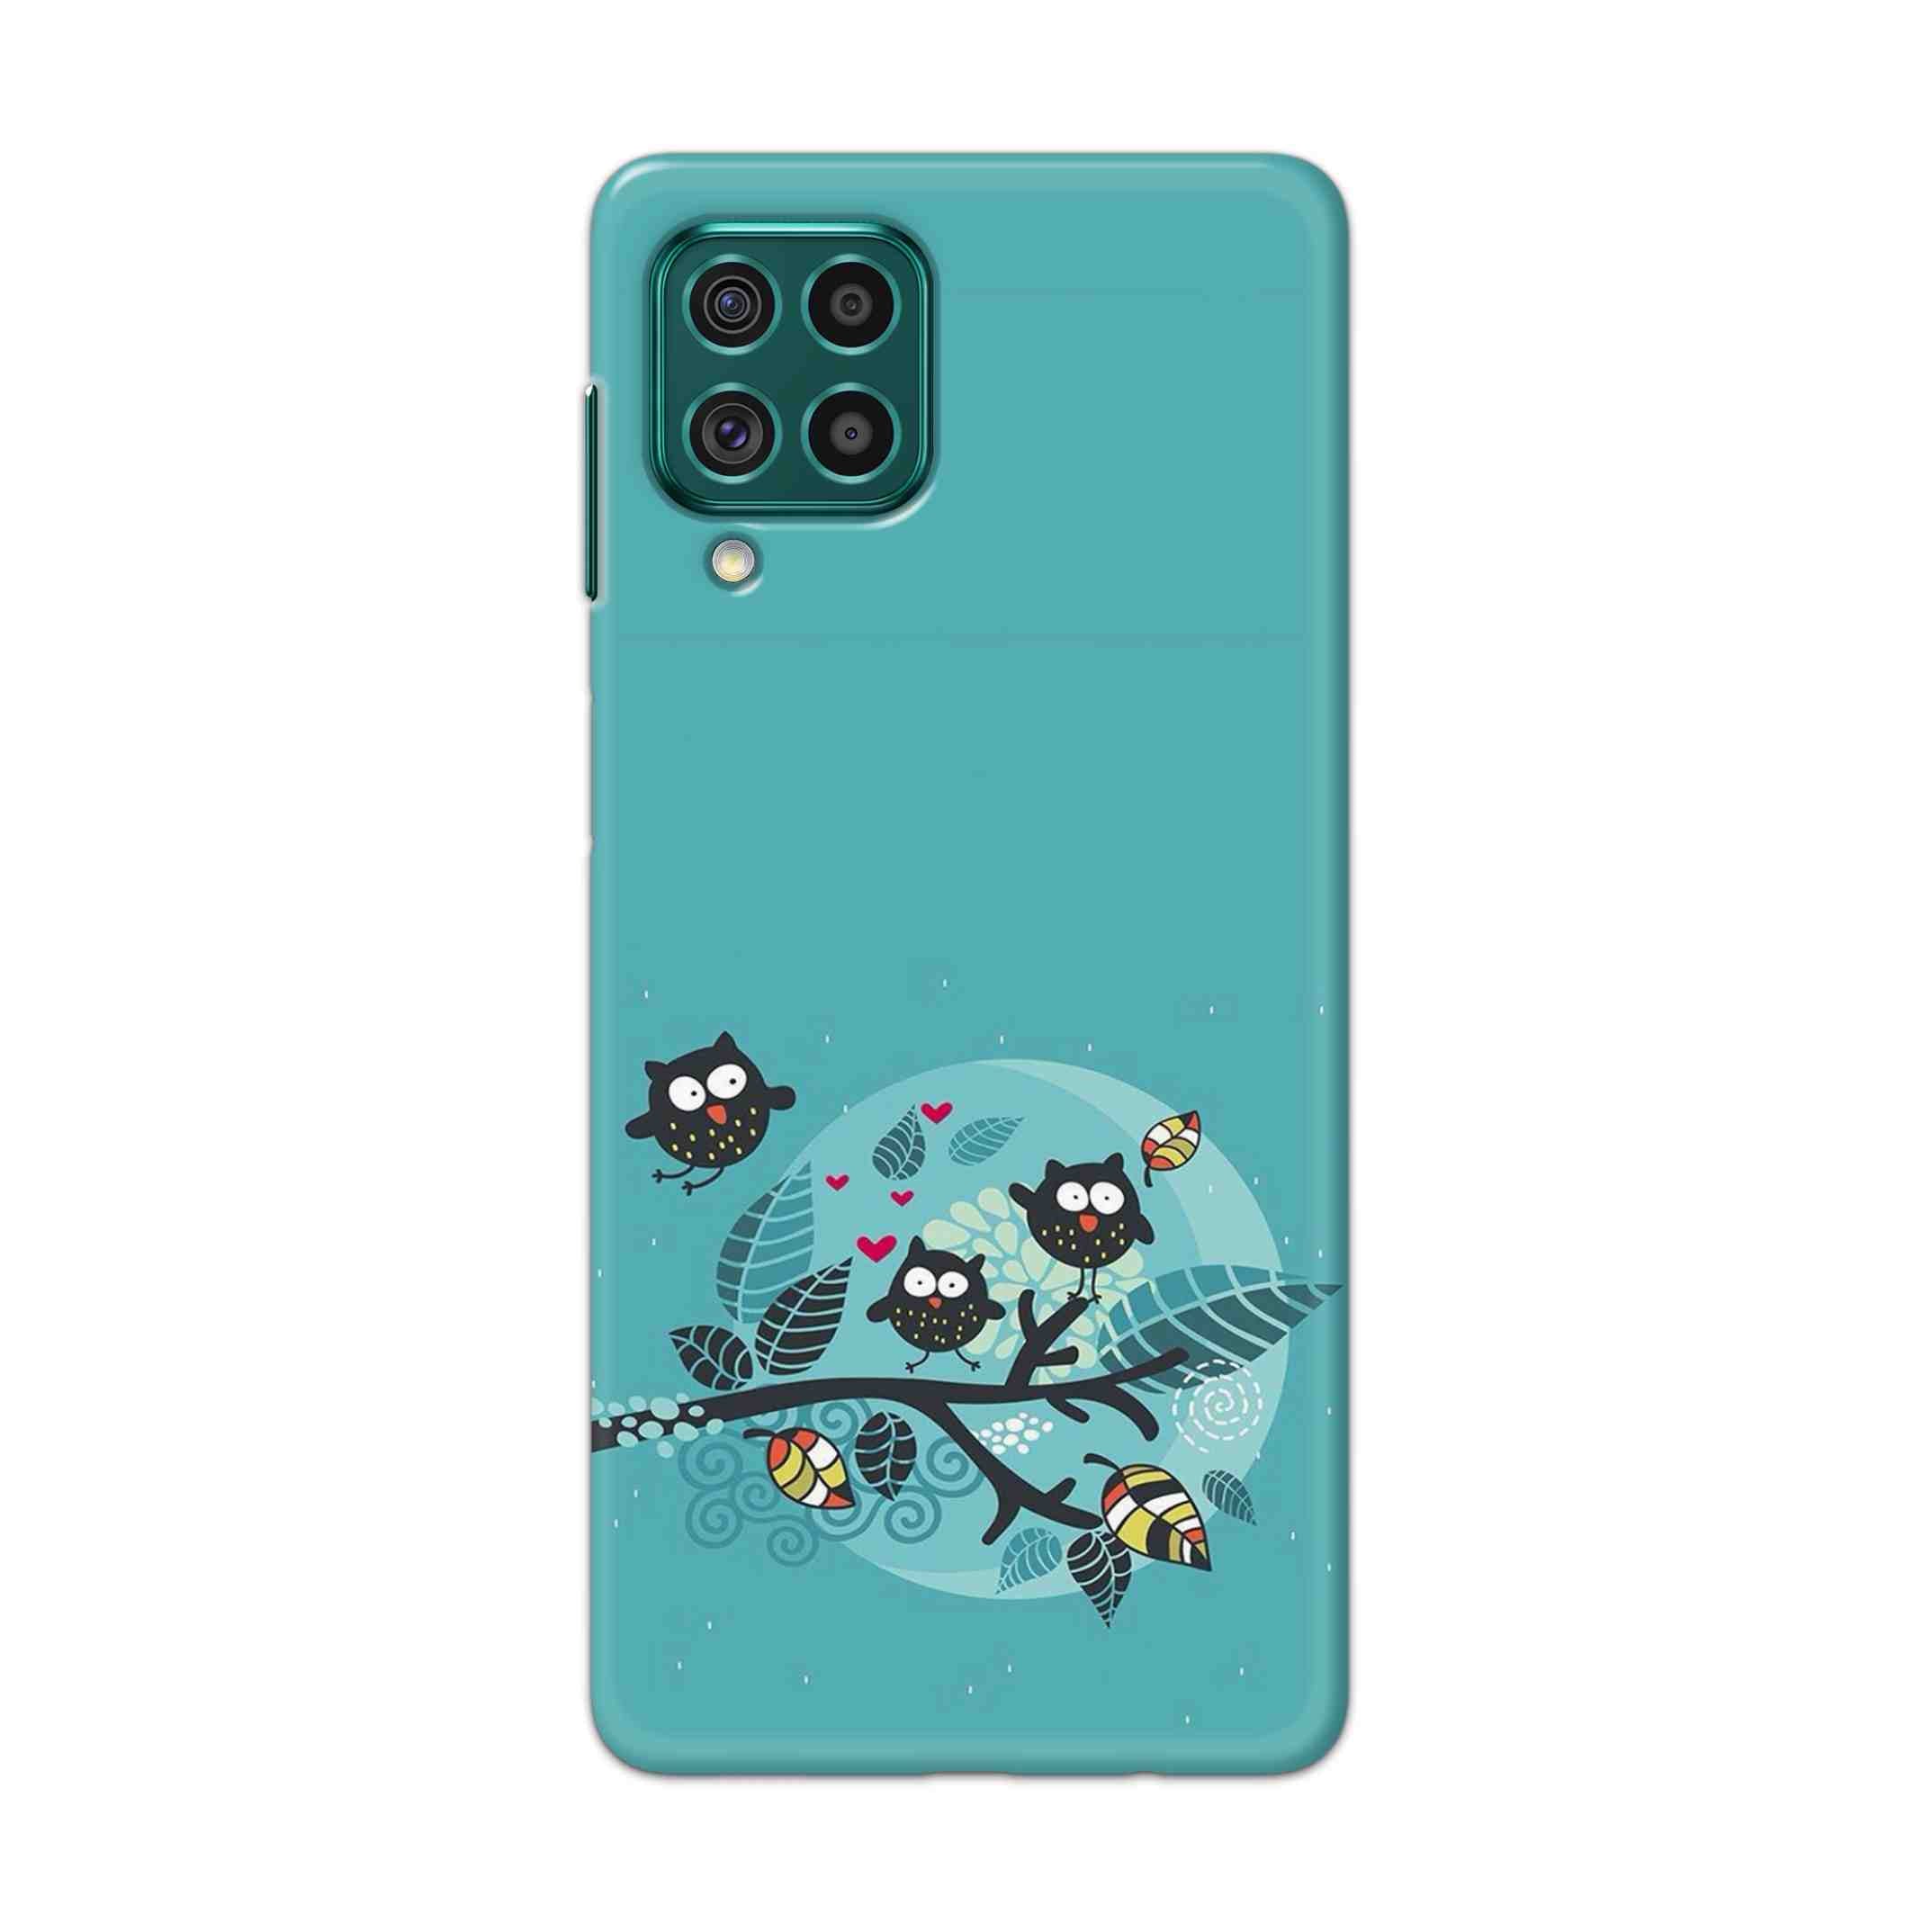 Buy Owl Hard Back Mobile Phone Case Cover For Galaxy F62 Online